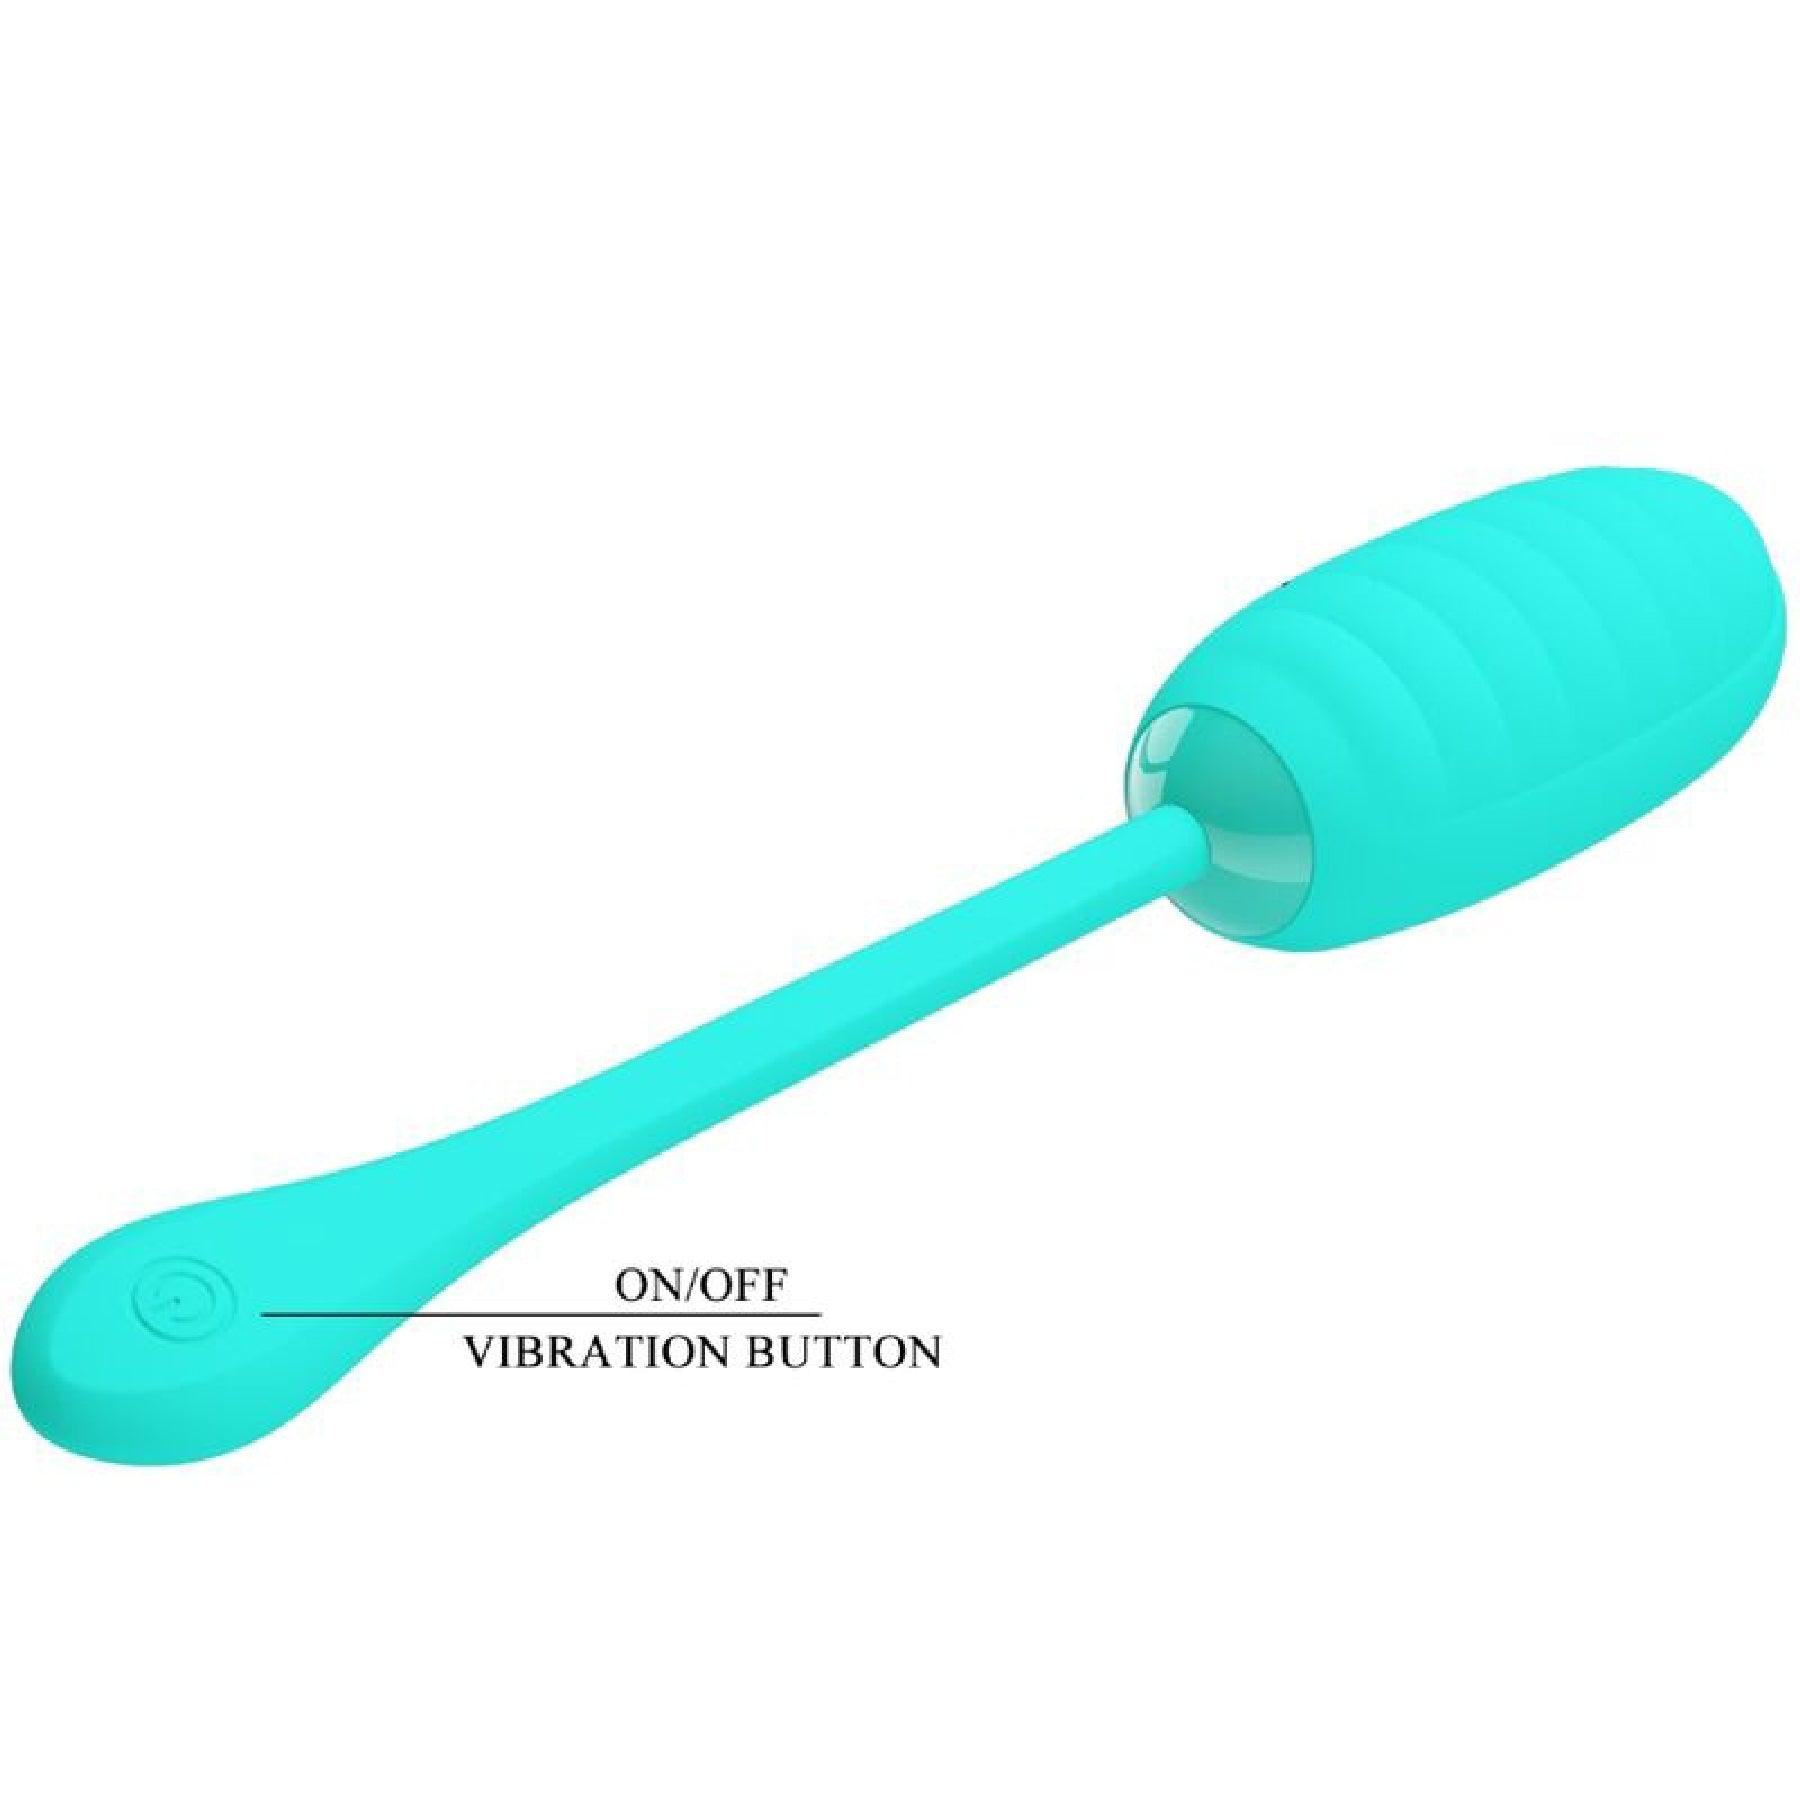 Kirk Rechargeable Vibrating Egg - Turquoise -